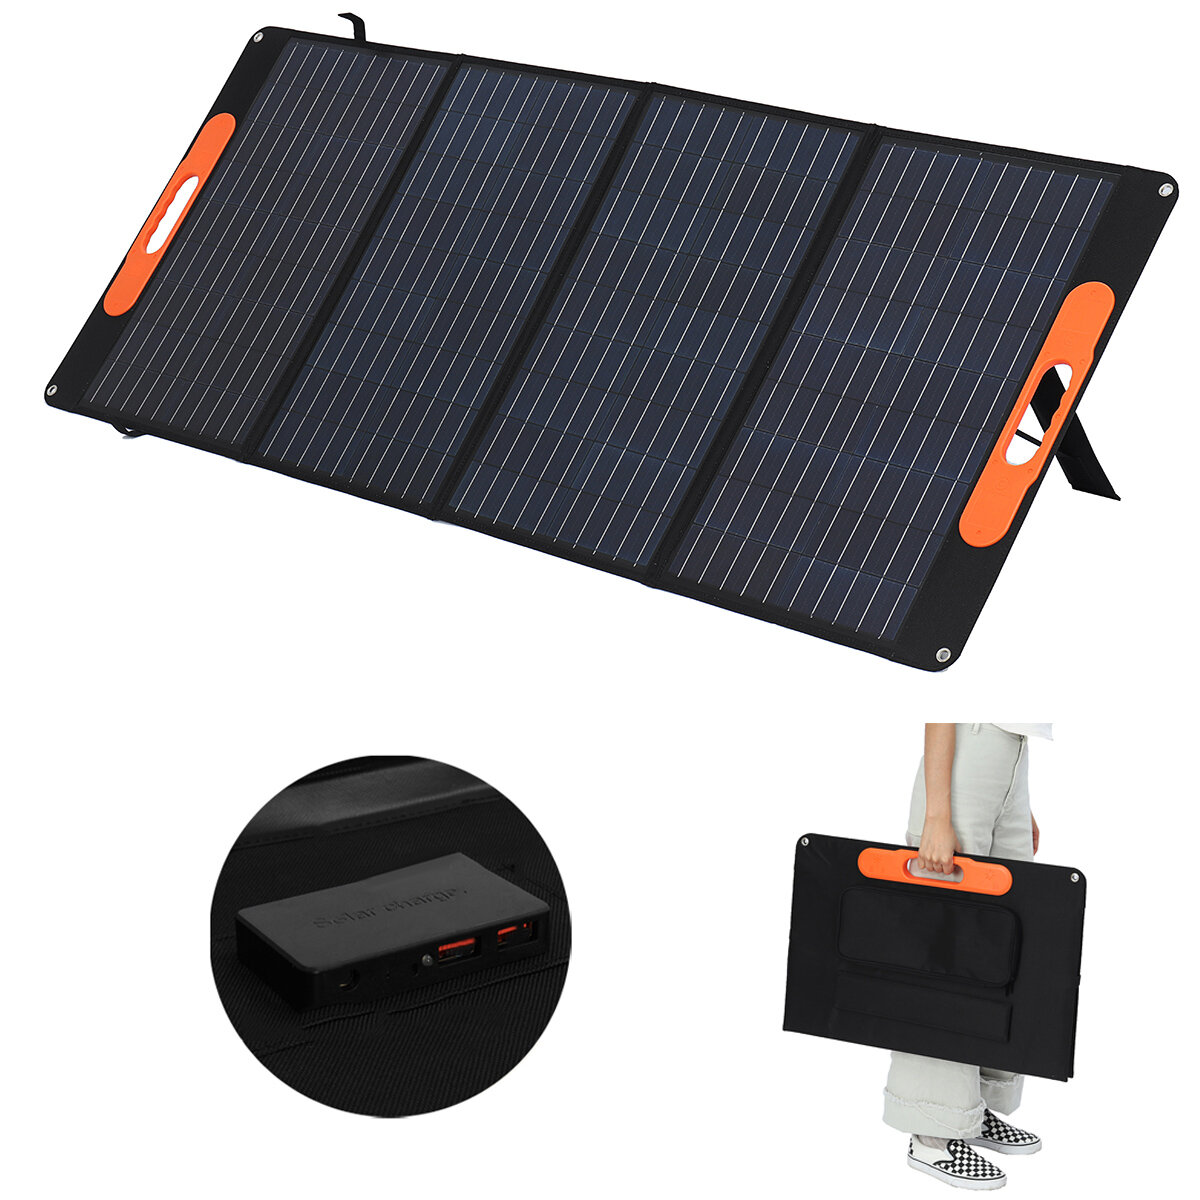 

120W Solar Panel Folding Bag 4-in-1 Output Port Portable Solar Power Generation Bag Portable Charging Outdoor Camping Tr